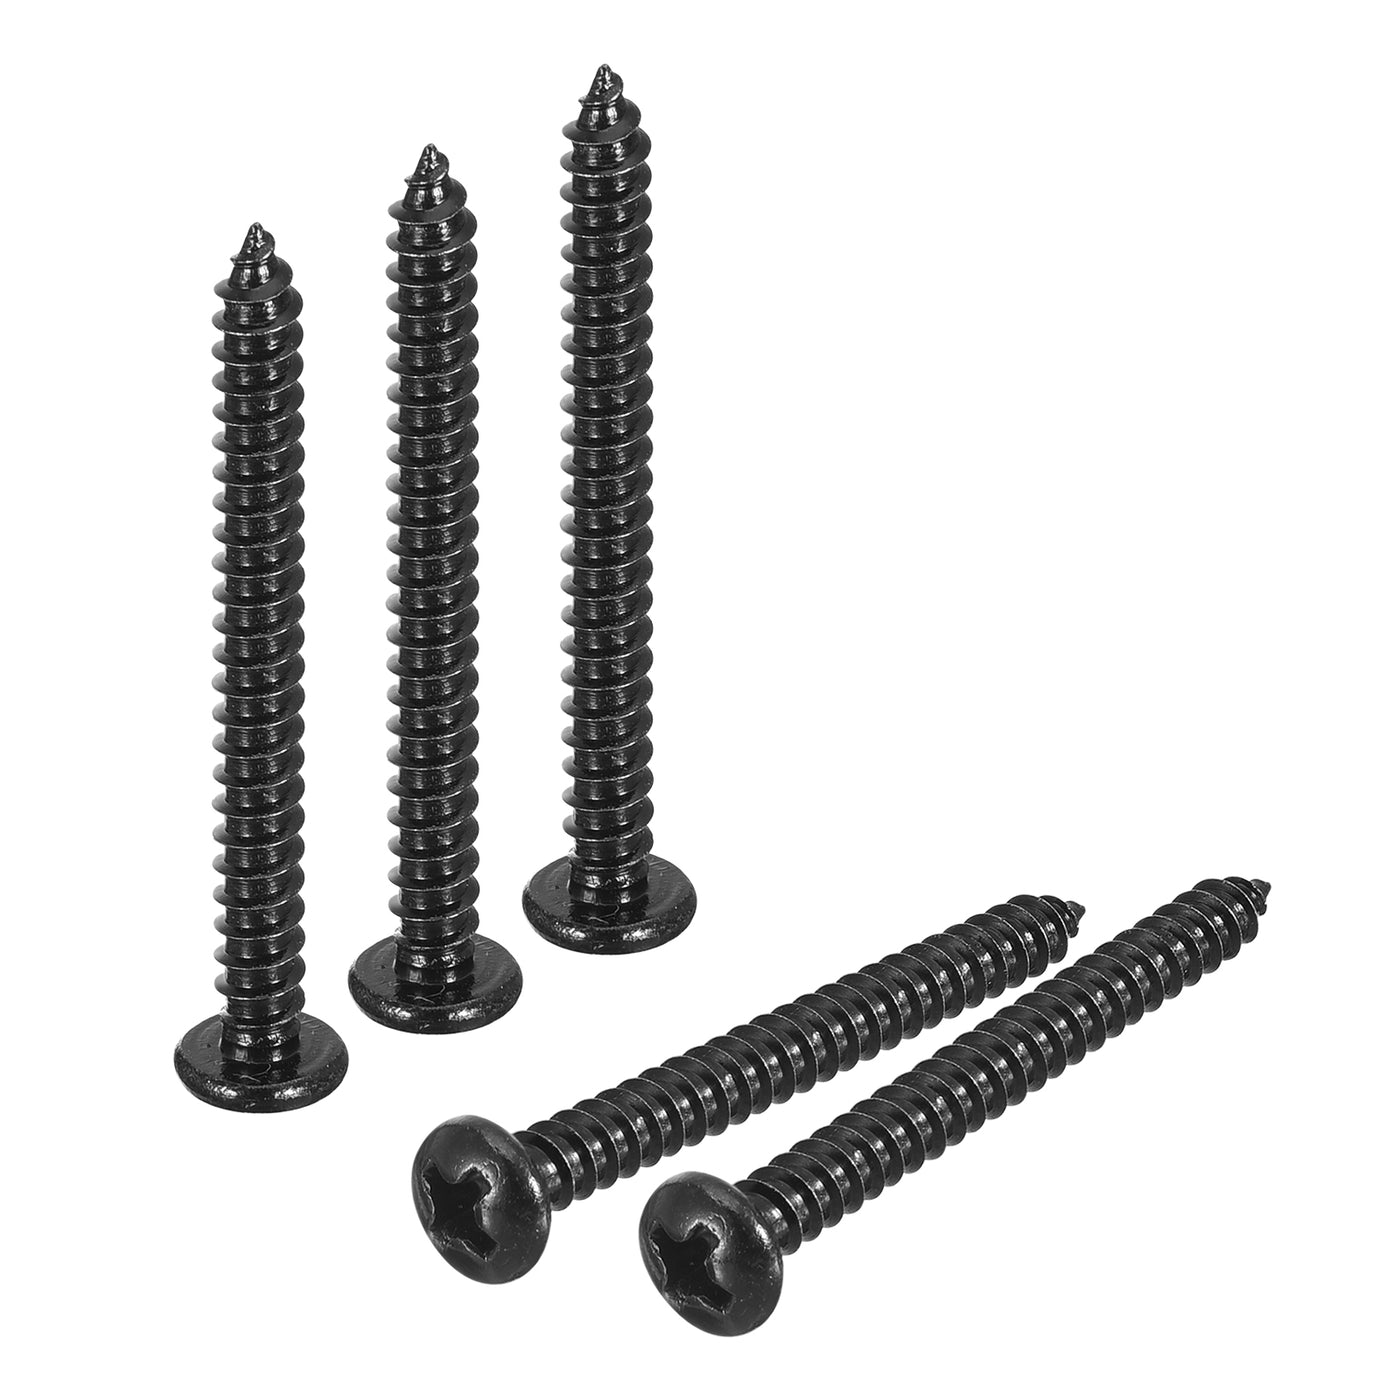 uxcell Uxcell #6 x 1-3/8" Phillips Pan Head Self-tapping Screw, 100pcs - 304 Stainless Steel Round Head Wood Screw Full Thread (Black)